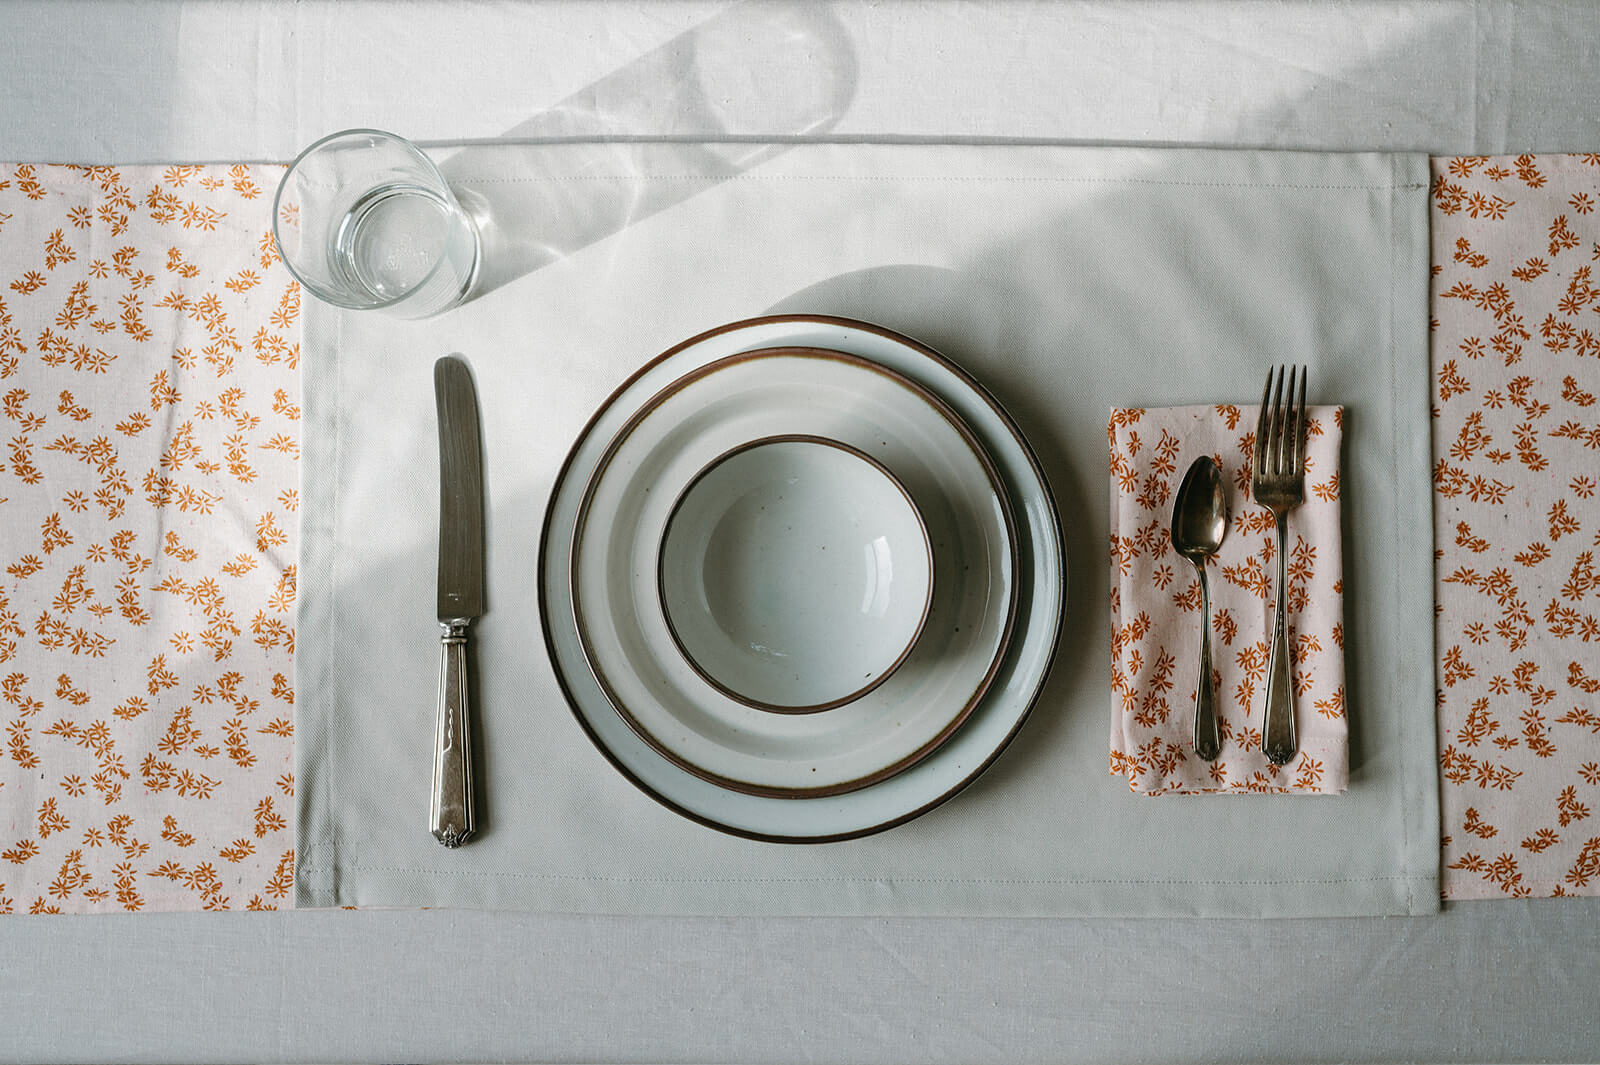 White plates and bowls on a white placemat with an orange floral napkin and table runner